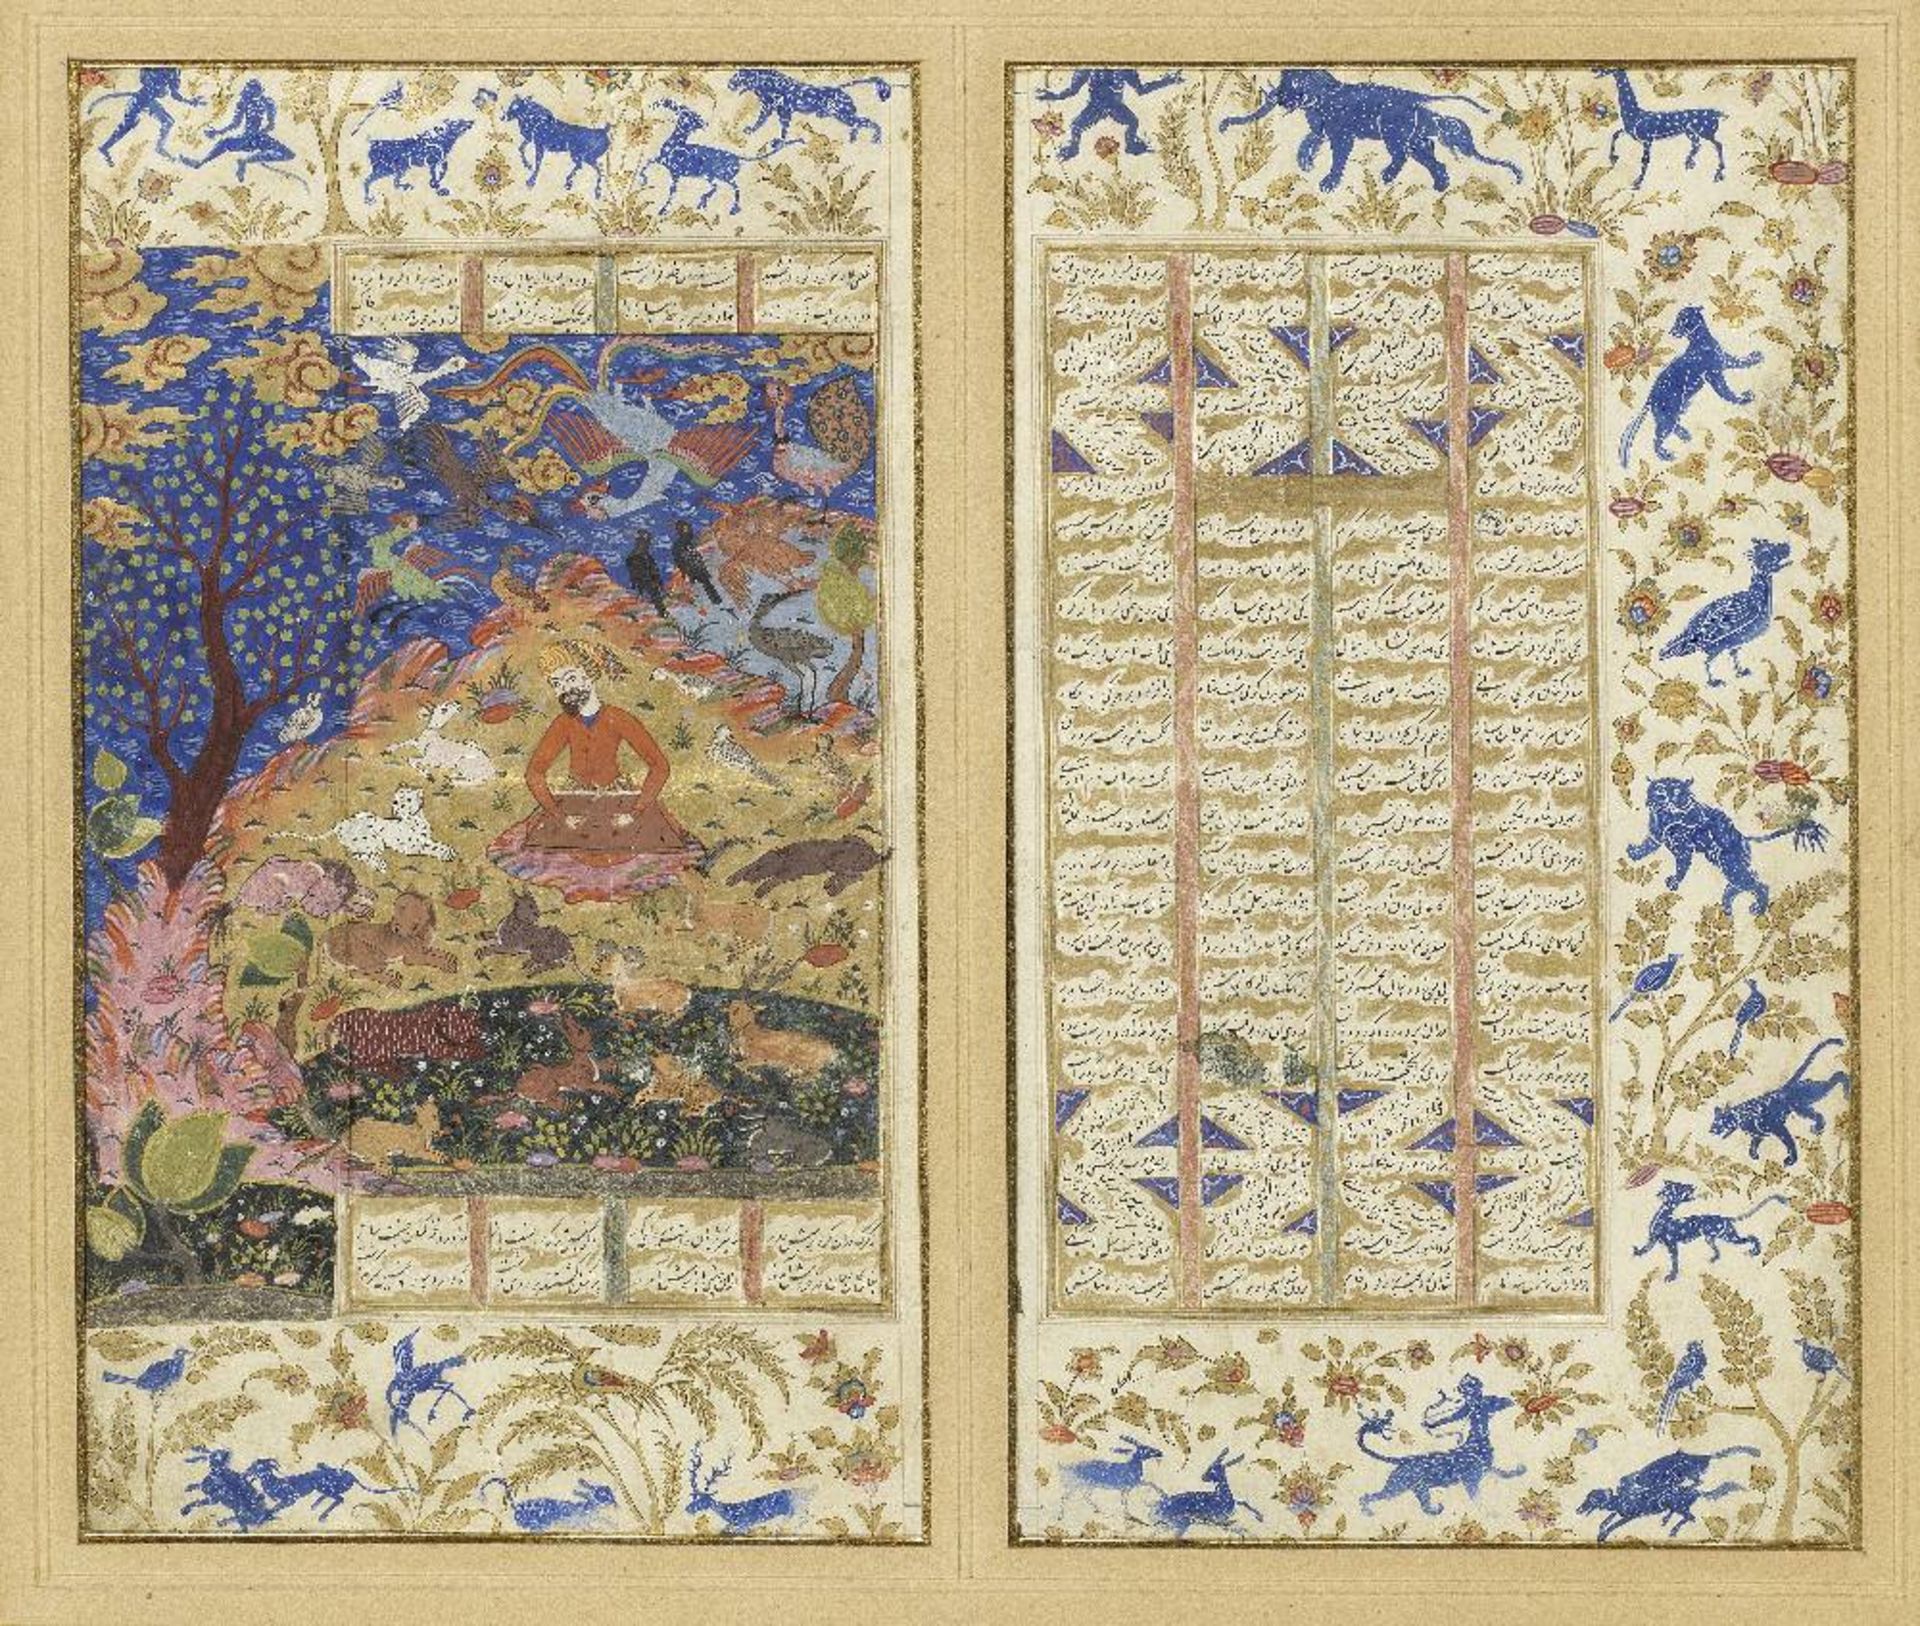 An illustrated leaf, and a text leaf, from Nizami's Kherad-nameh, the second book of the Iskanda...